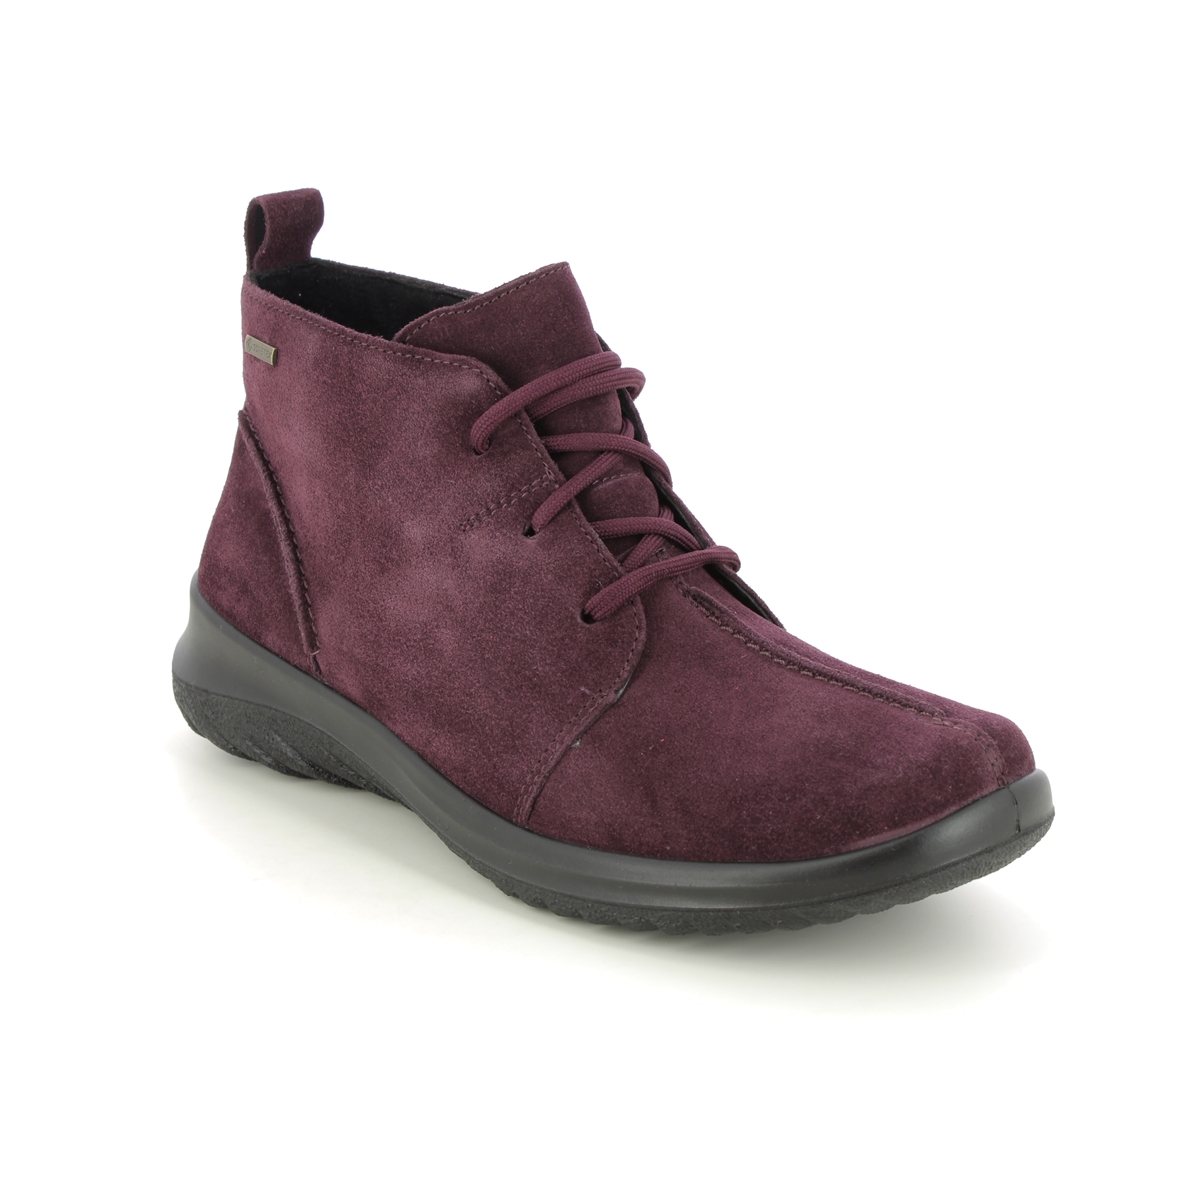 Legero Soft Lace Gtx Wine Womens Lace Up Boots 2009569-5920 in a Plain Leather in Size 6.5